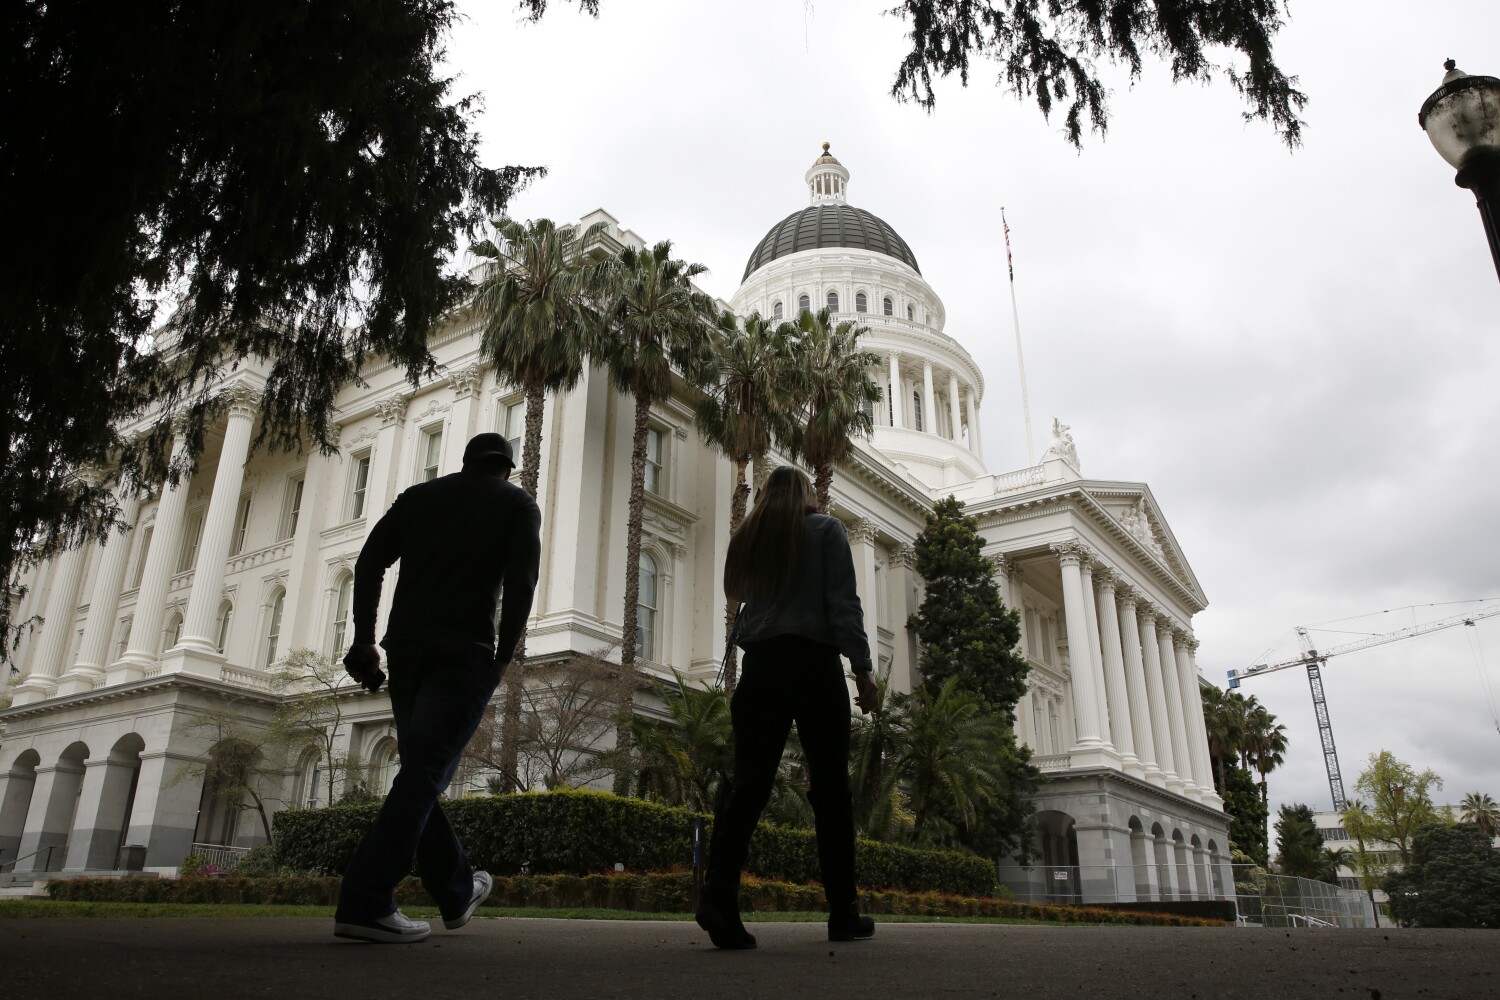 California lawmakers urge more help for schools, businesses in budget talks with Newsom